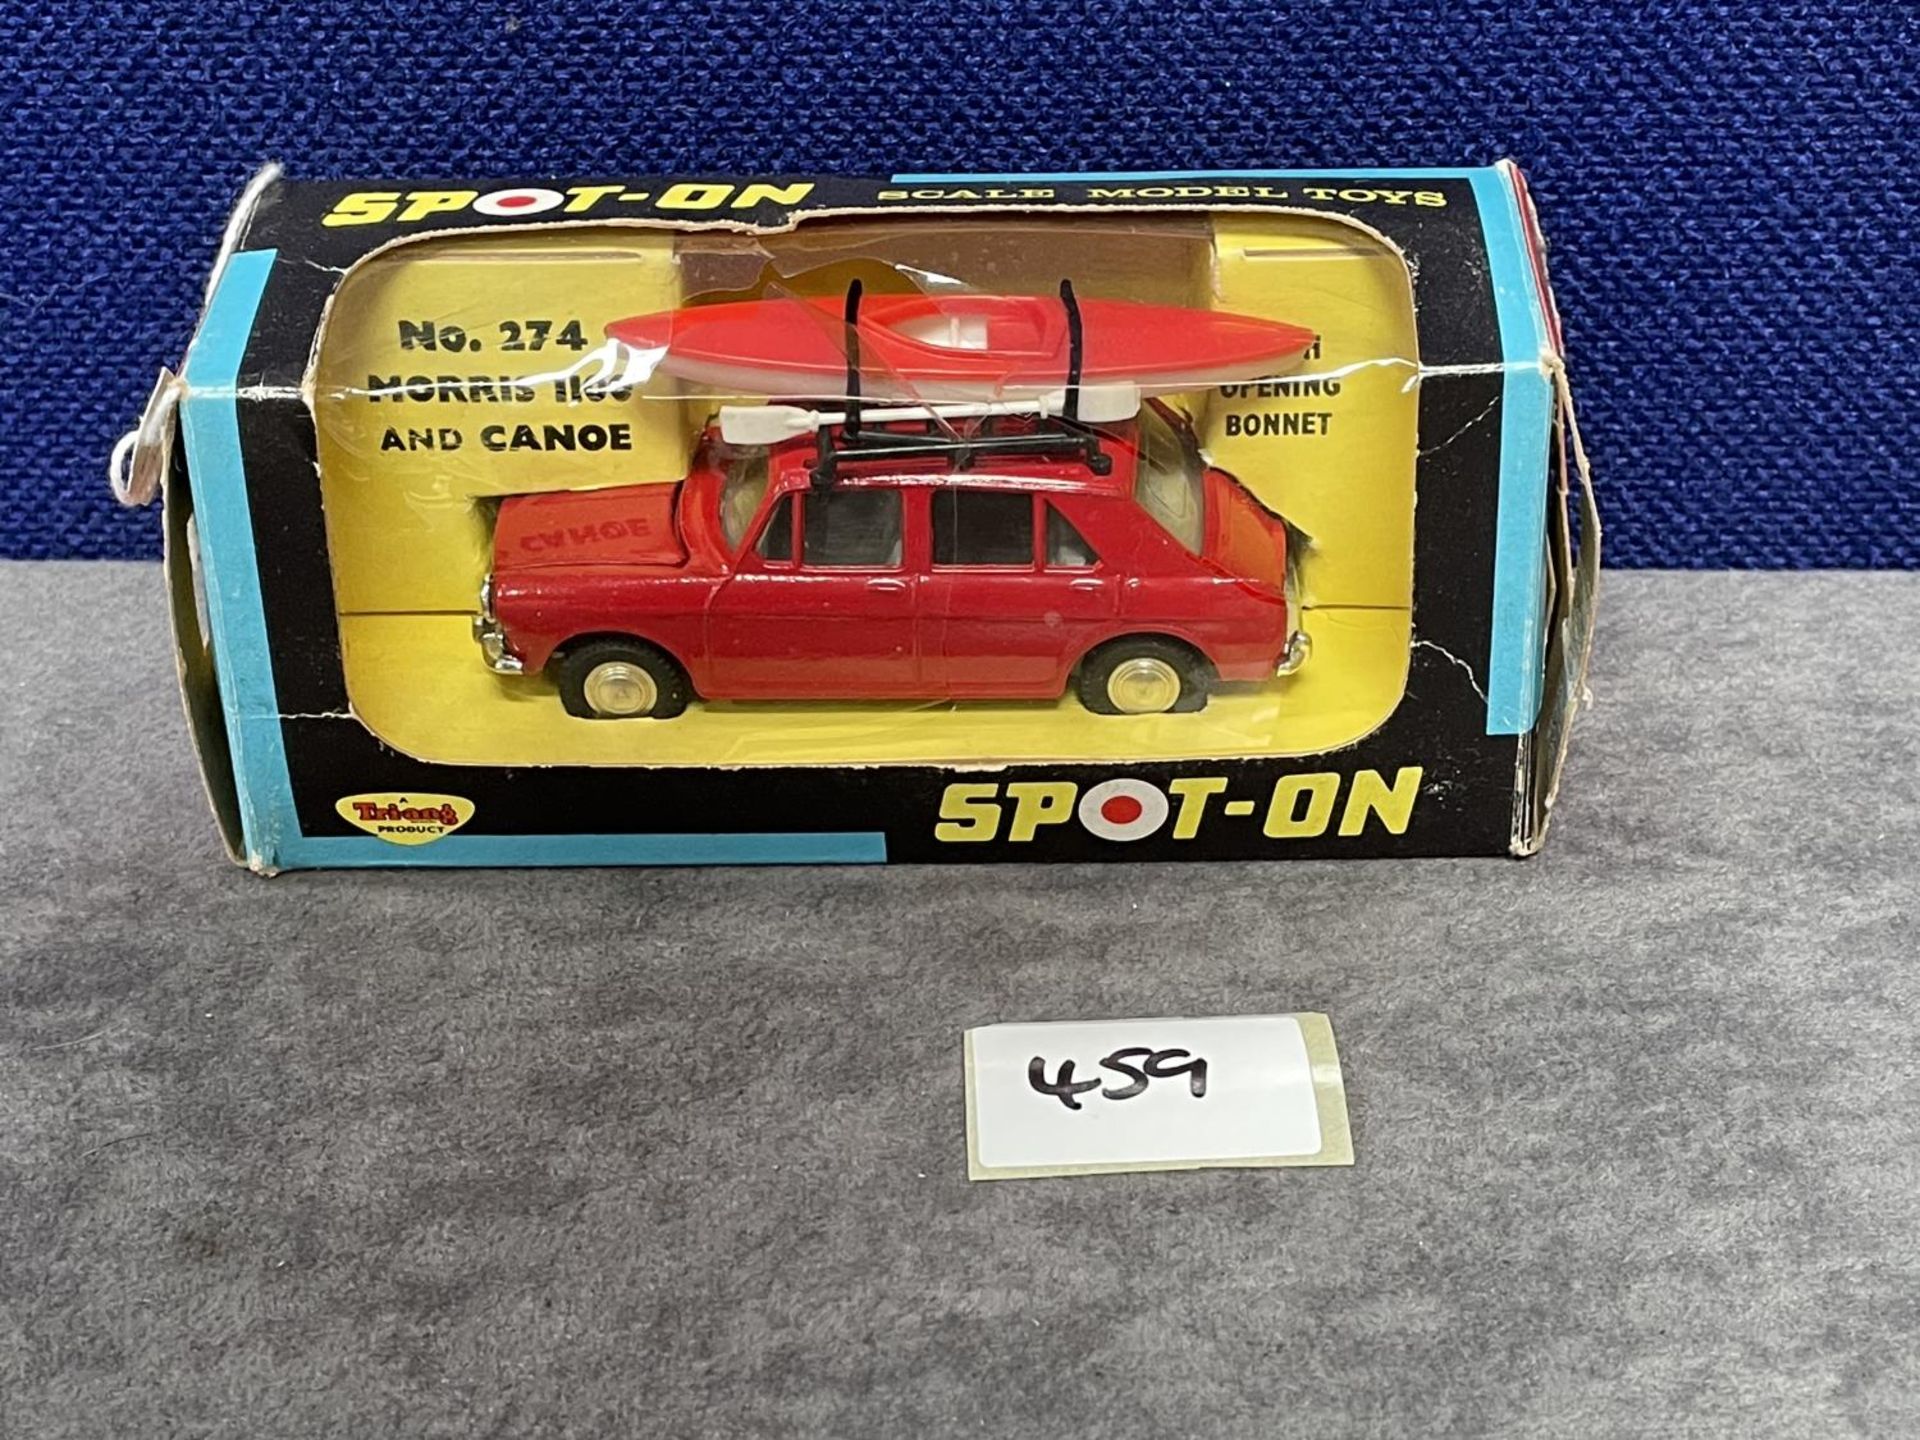 Spot-On #274 Morris 1100 With Canoe Green - Red/White Canoe. Mint Model In Excellent Box Damage To